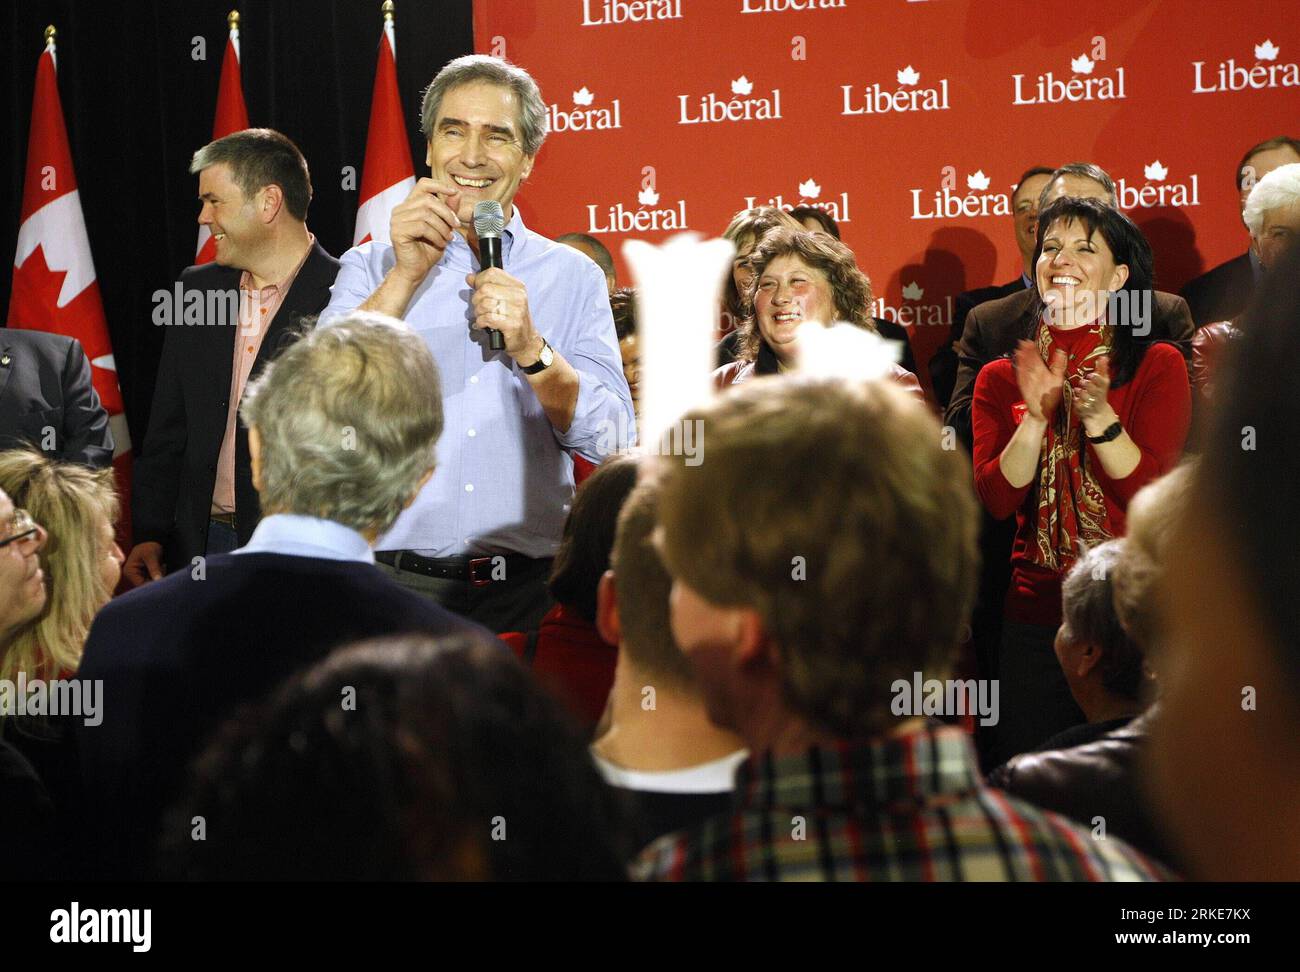 Bildnummer: 55091990  Datum: 26.03.2011  Copyright: imago/Xinhua (110327) -- OTTAWA, March 27, 2011 (Xinhua) -- Canada s Liberal Party leader Michael Ignatieff launches his campaign in Ottawa, Canada, March 26, 2011. Canada s political party leaders kicked off their campaigns for the 41st general election Saturday after the Canadian House of Commons passed a non-confidence motion defeating the Conservative government led by Prime Minister Stephen Harper for contempt of Parliament. (Xinhua/David Kawai) (lyx) CANADA-GENERAL ELECTION-PARTY LEADERS-CAMPAIGN PUBLICATIONxNOTxINxCHN People Politik Wa Stock Photo